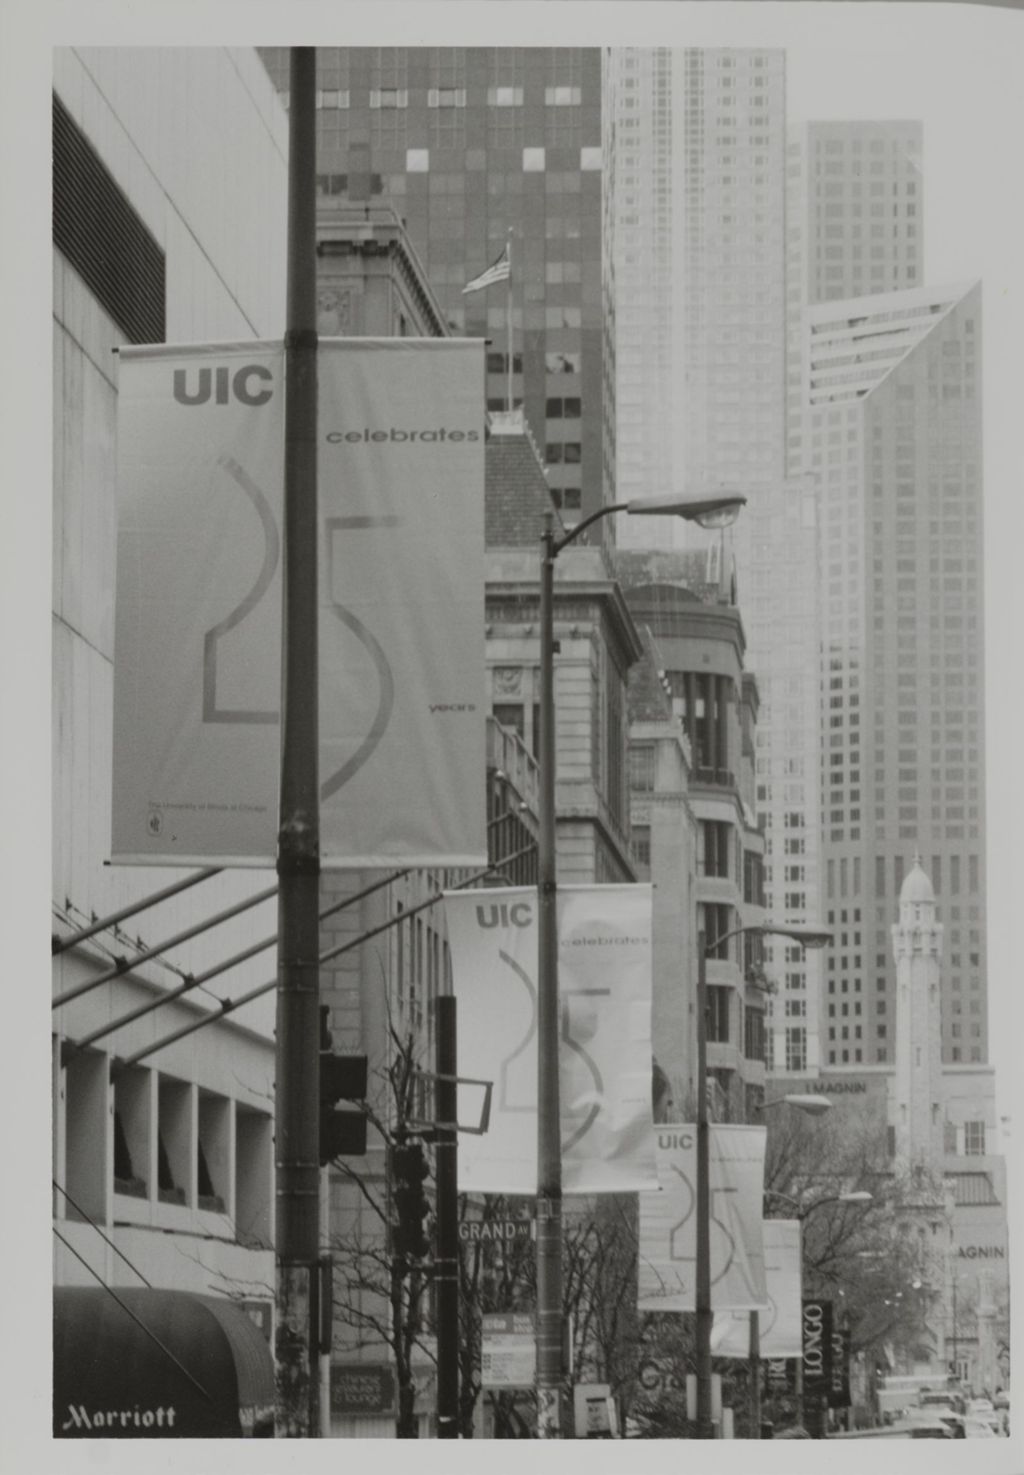 Miniature of Banners for UIC's 25th Anniversary in downtown Chicago